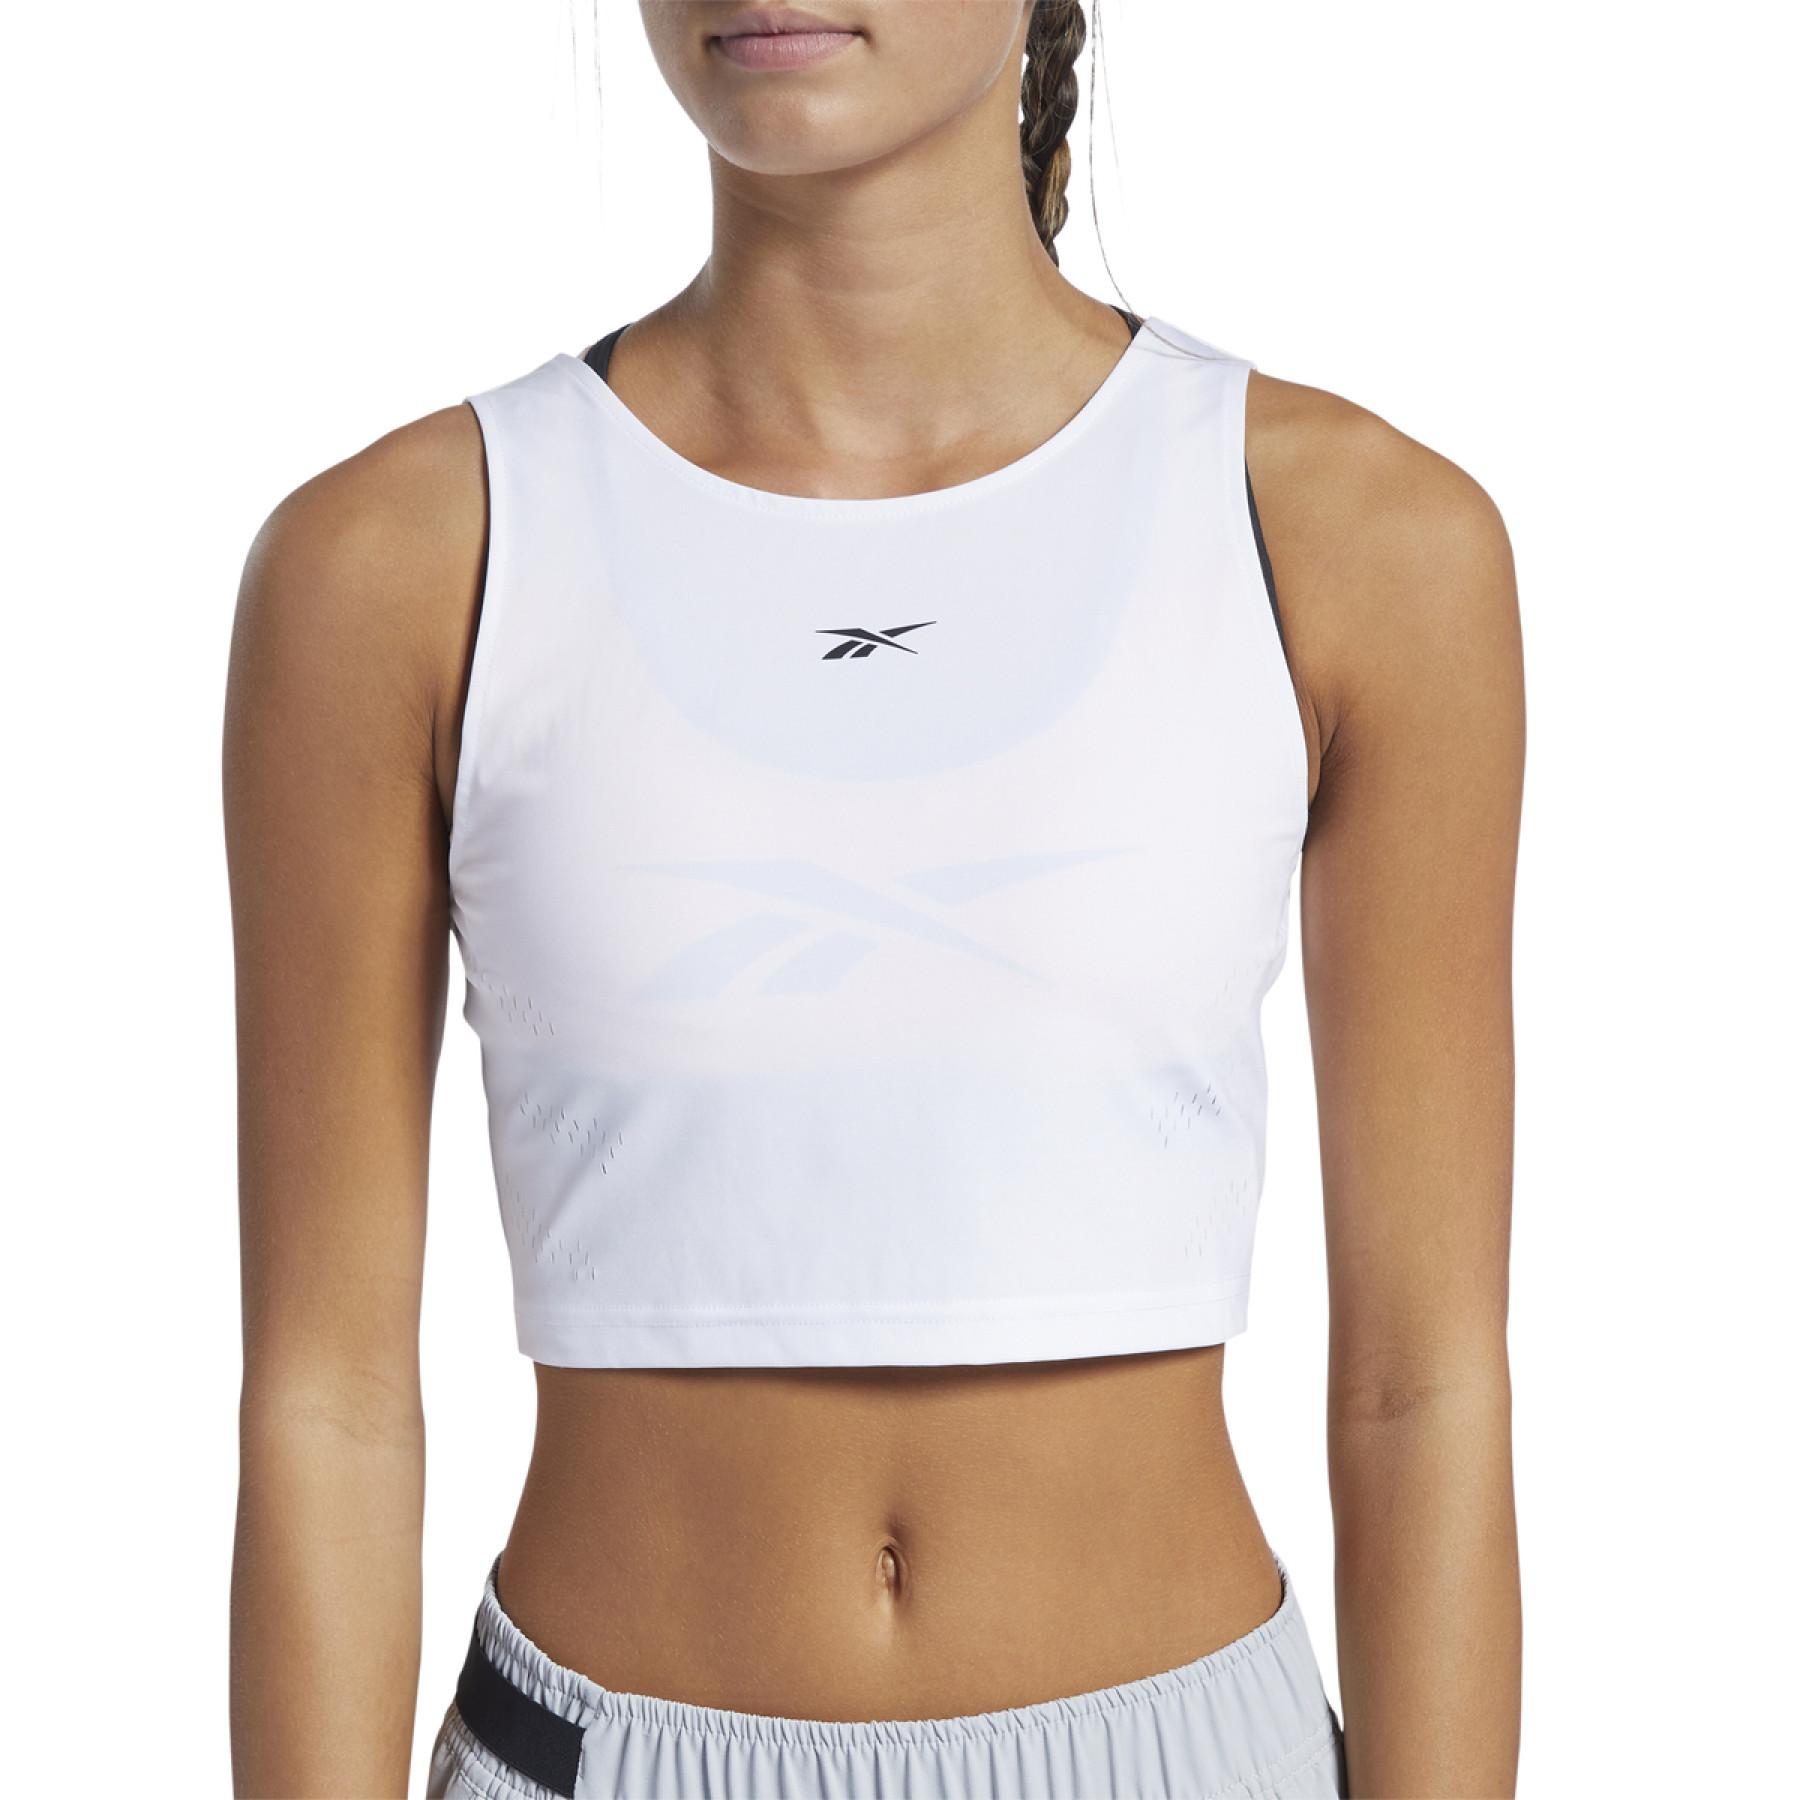 Maillot court femme Reebok Les Mills® Perforated